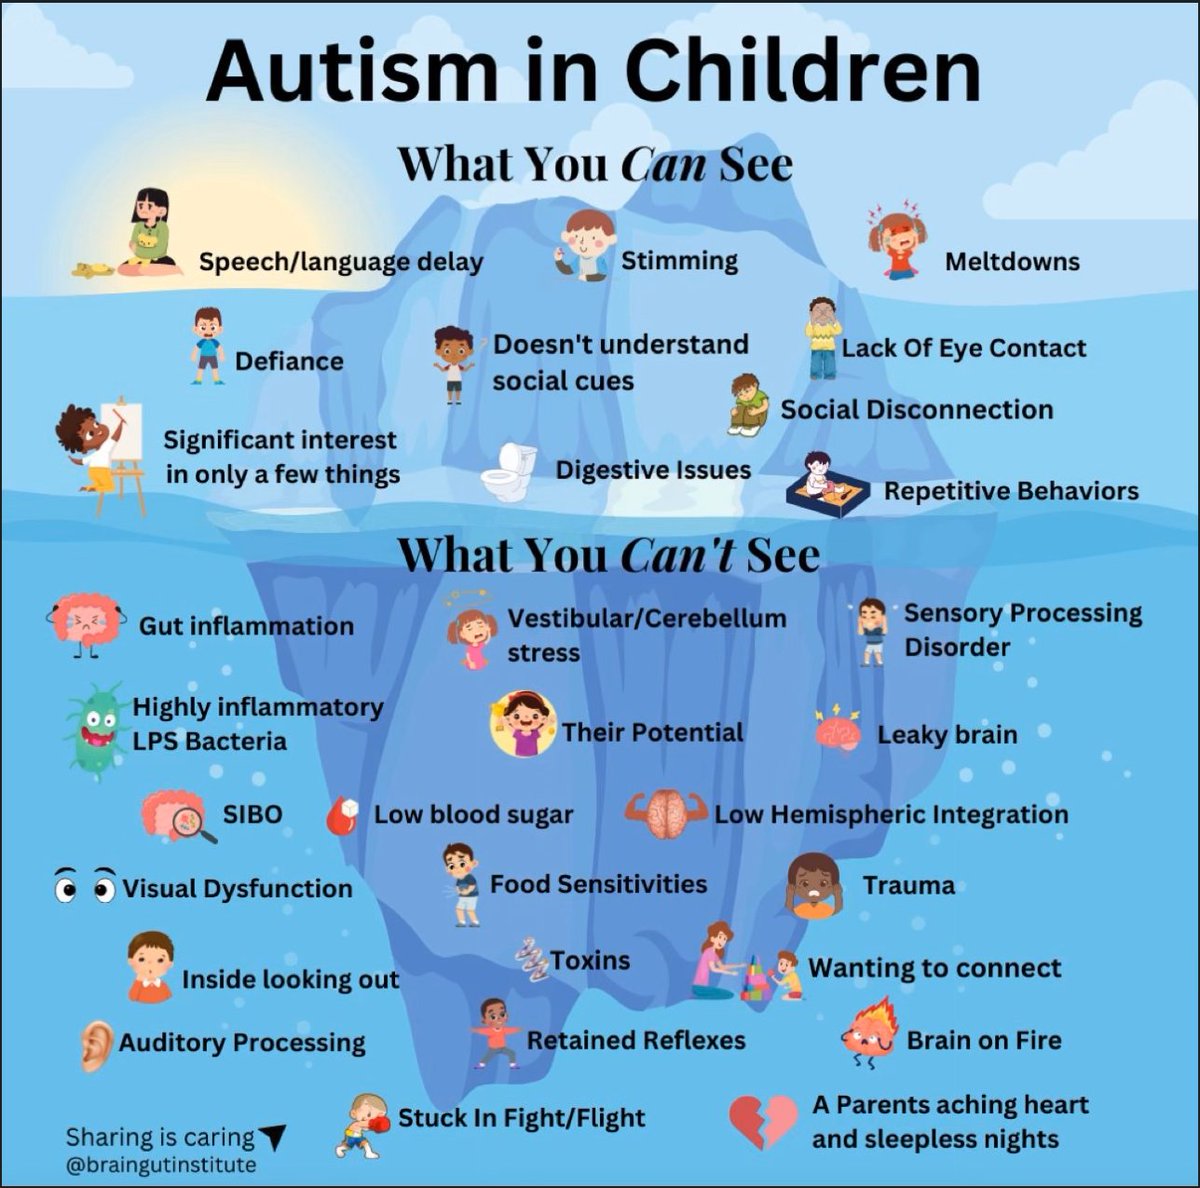 There is more to autism than meets the eye; empathy is important! Courtesy of the Brain Gut Institute

#autism #autismawareness #autismparent #parentinghelp #fightorflight #gutinflammation #childhooddisorders #speechdelay #developmentaldelays #digestiveissues #retainedreflexes